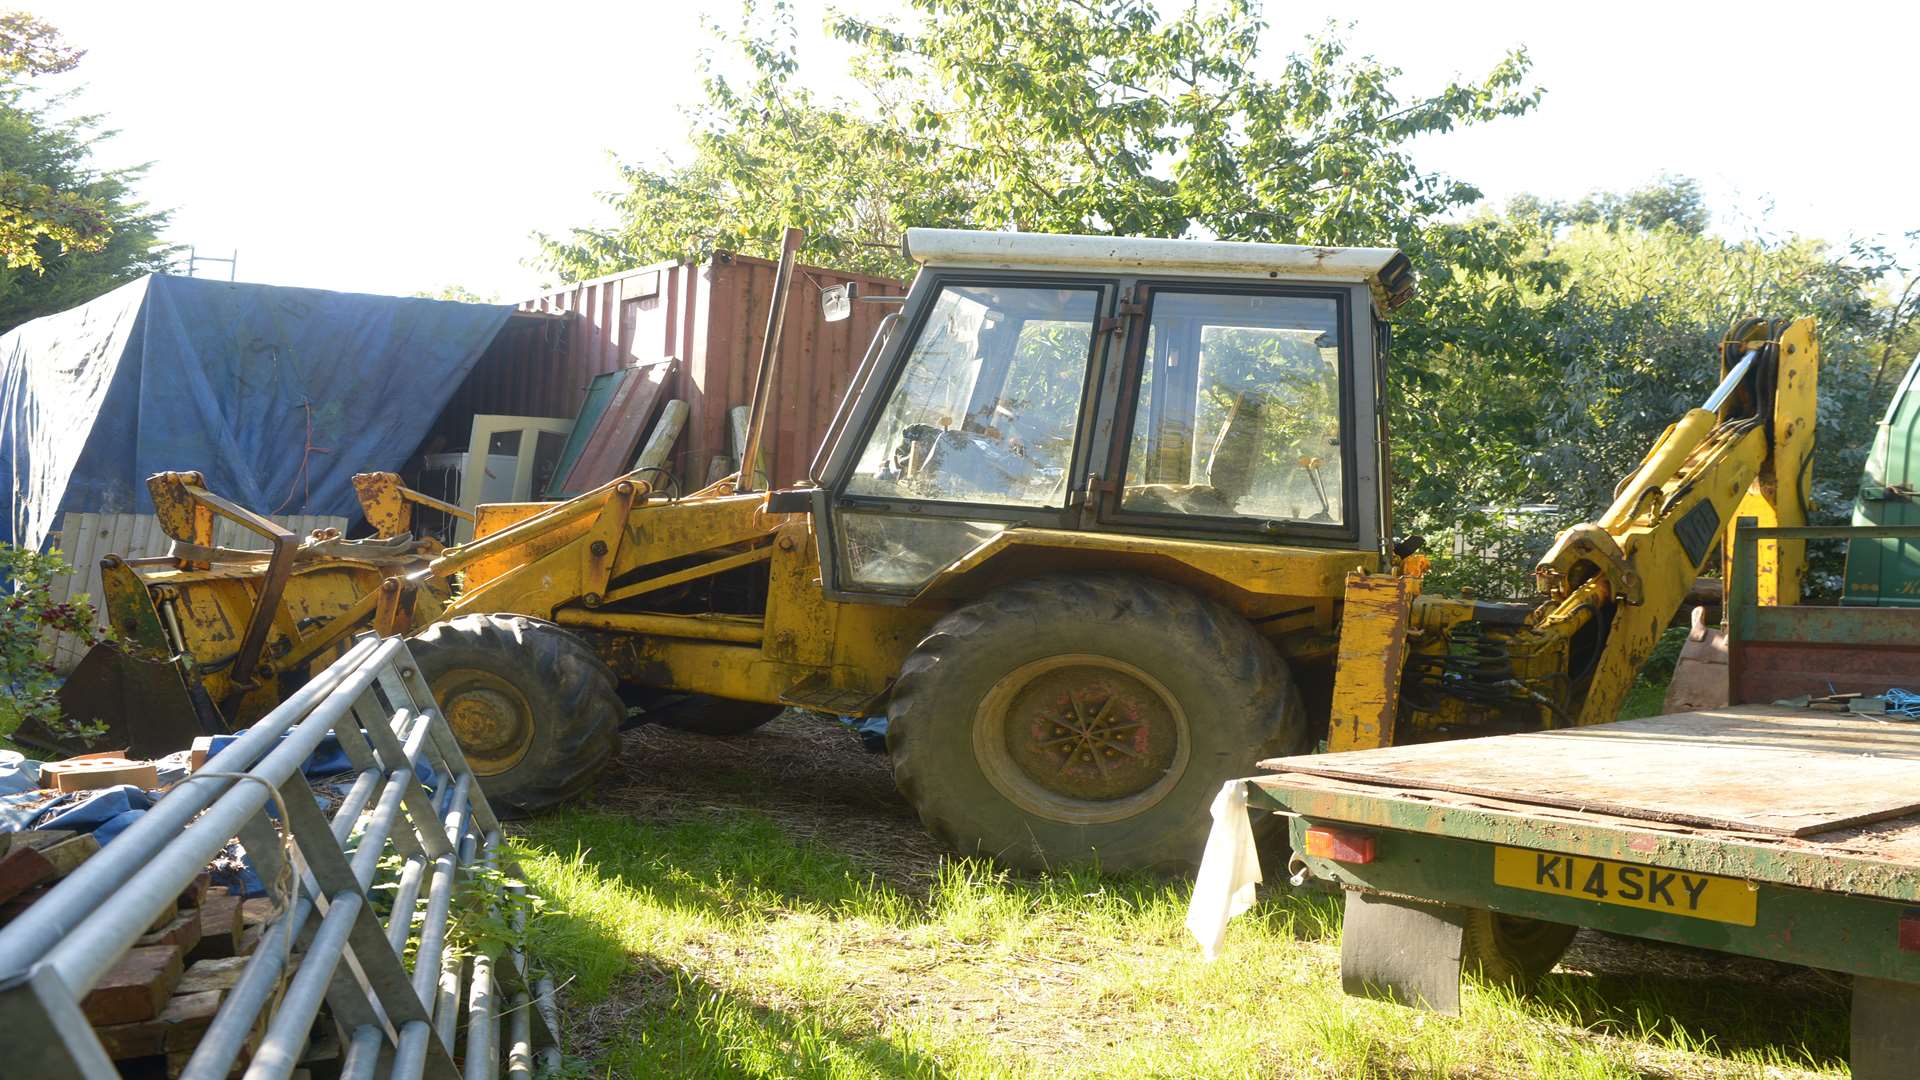 The JCB used to destroy the garden. Picture: SWNS.